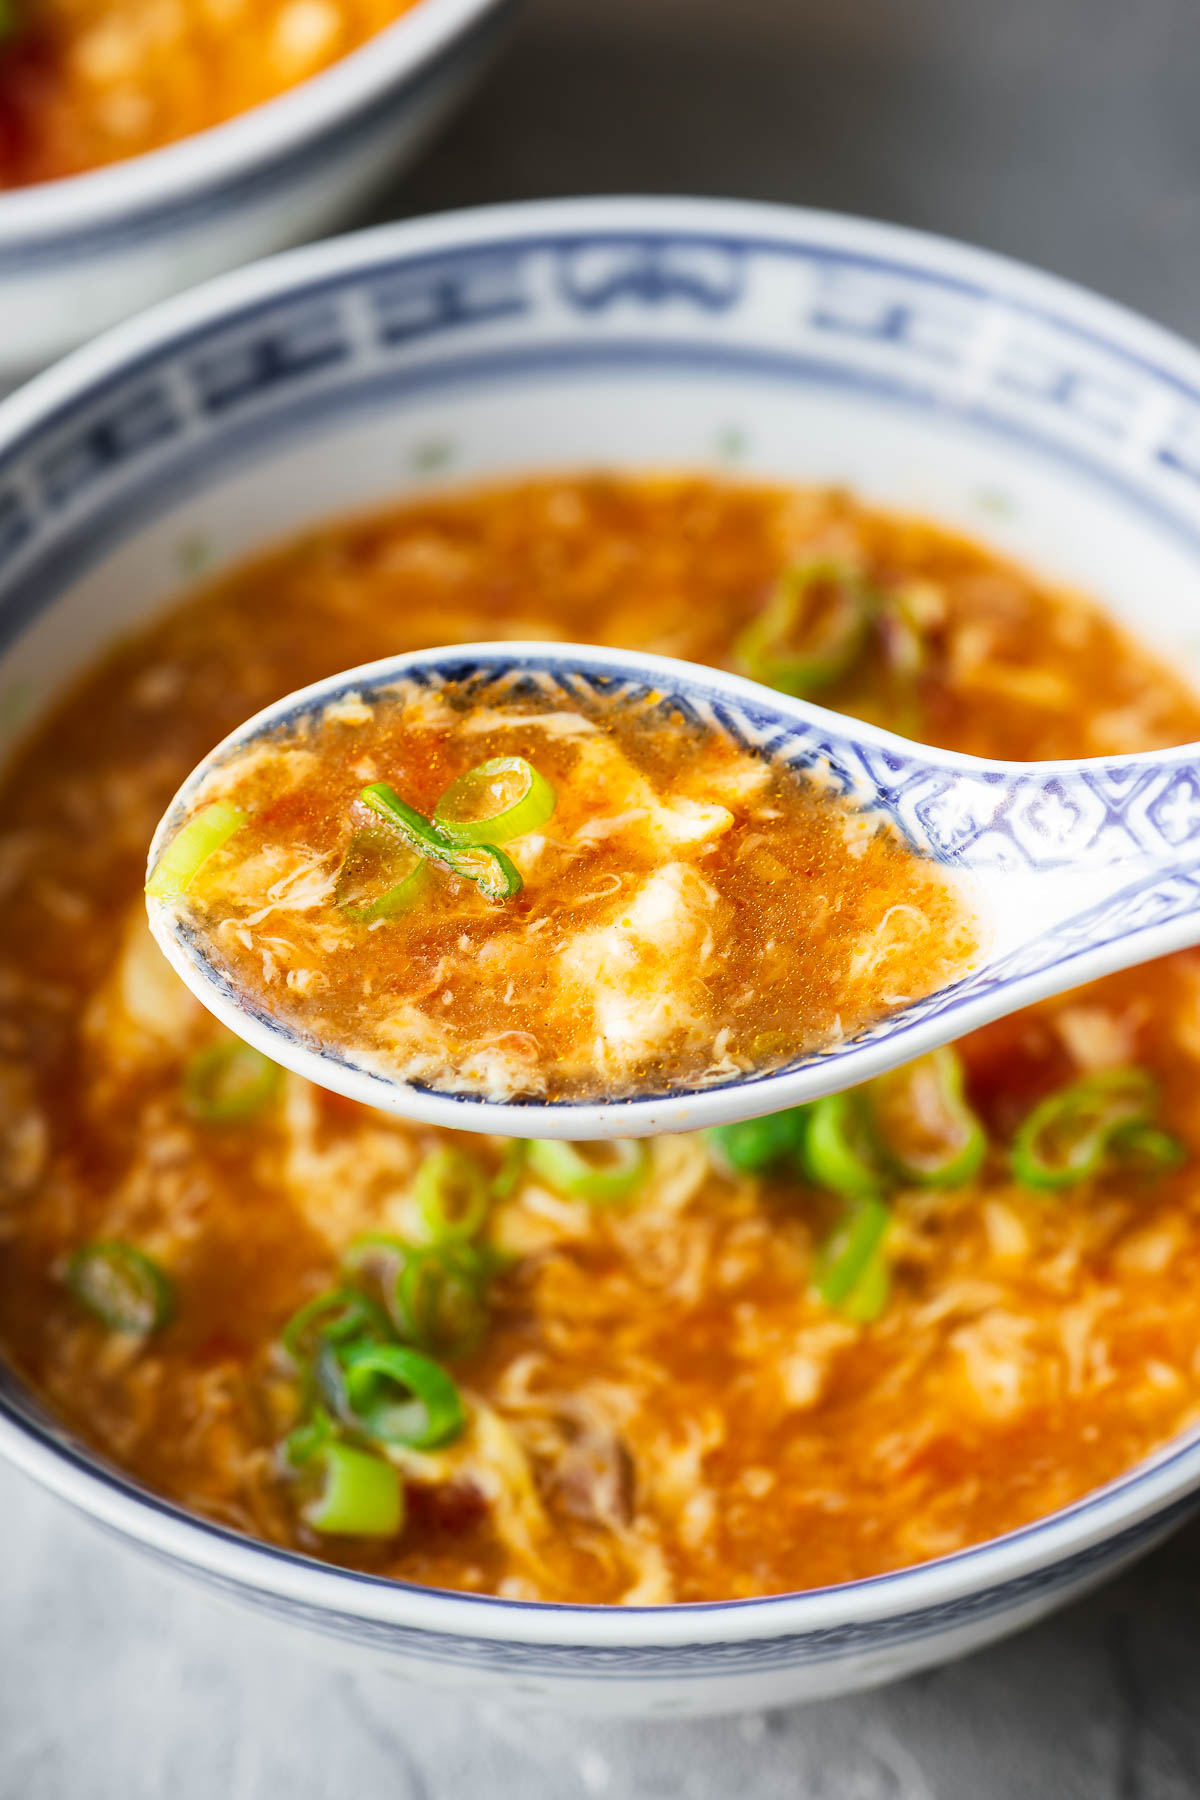 A close-up view of a spoonful of delicate egg ribbons over a bowl of tomato egg drop soup.